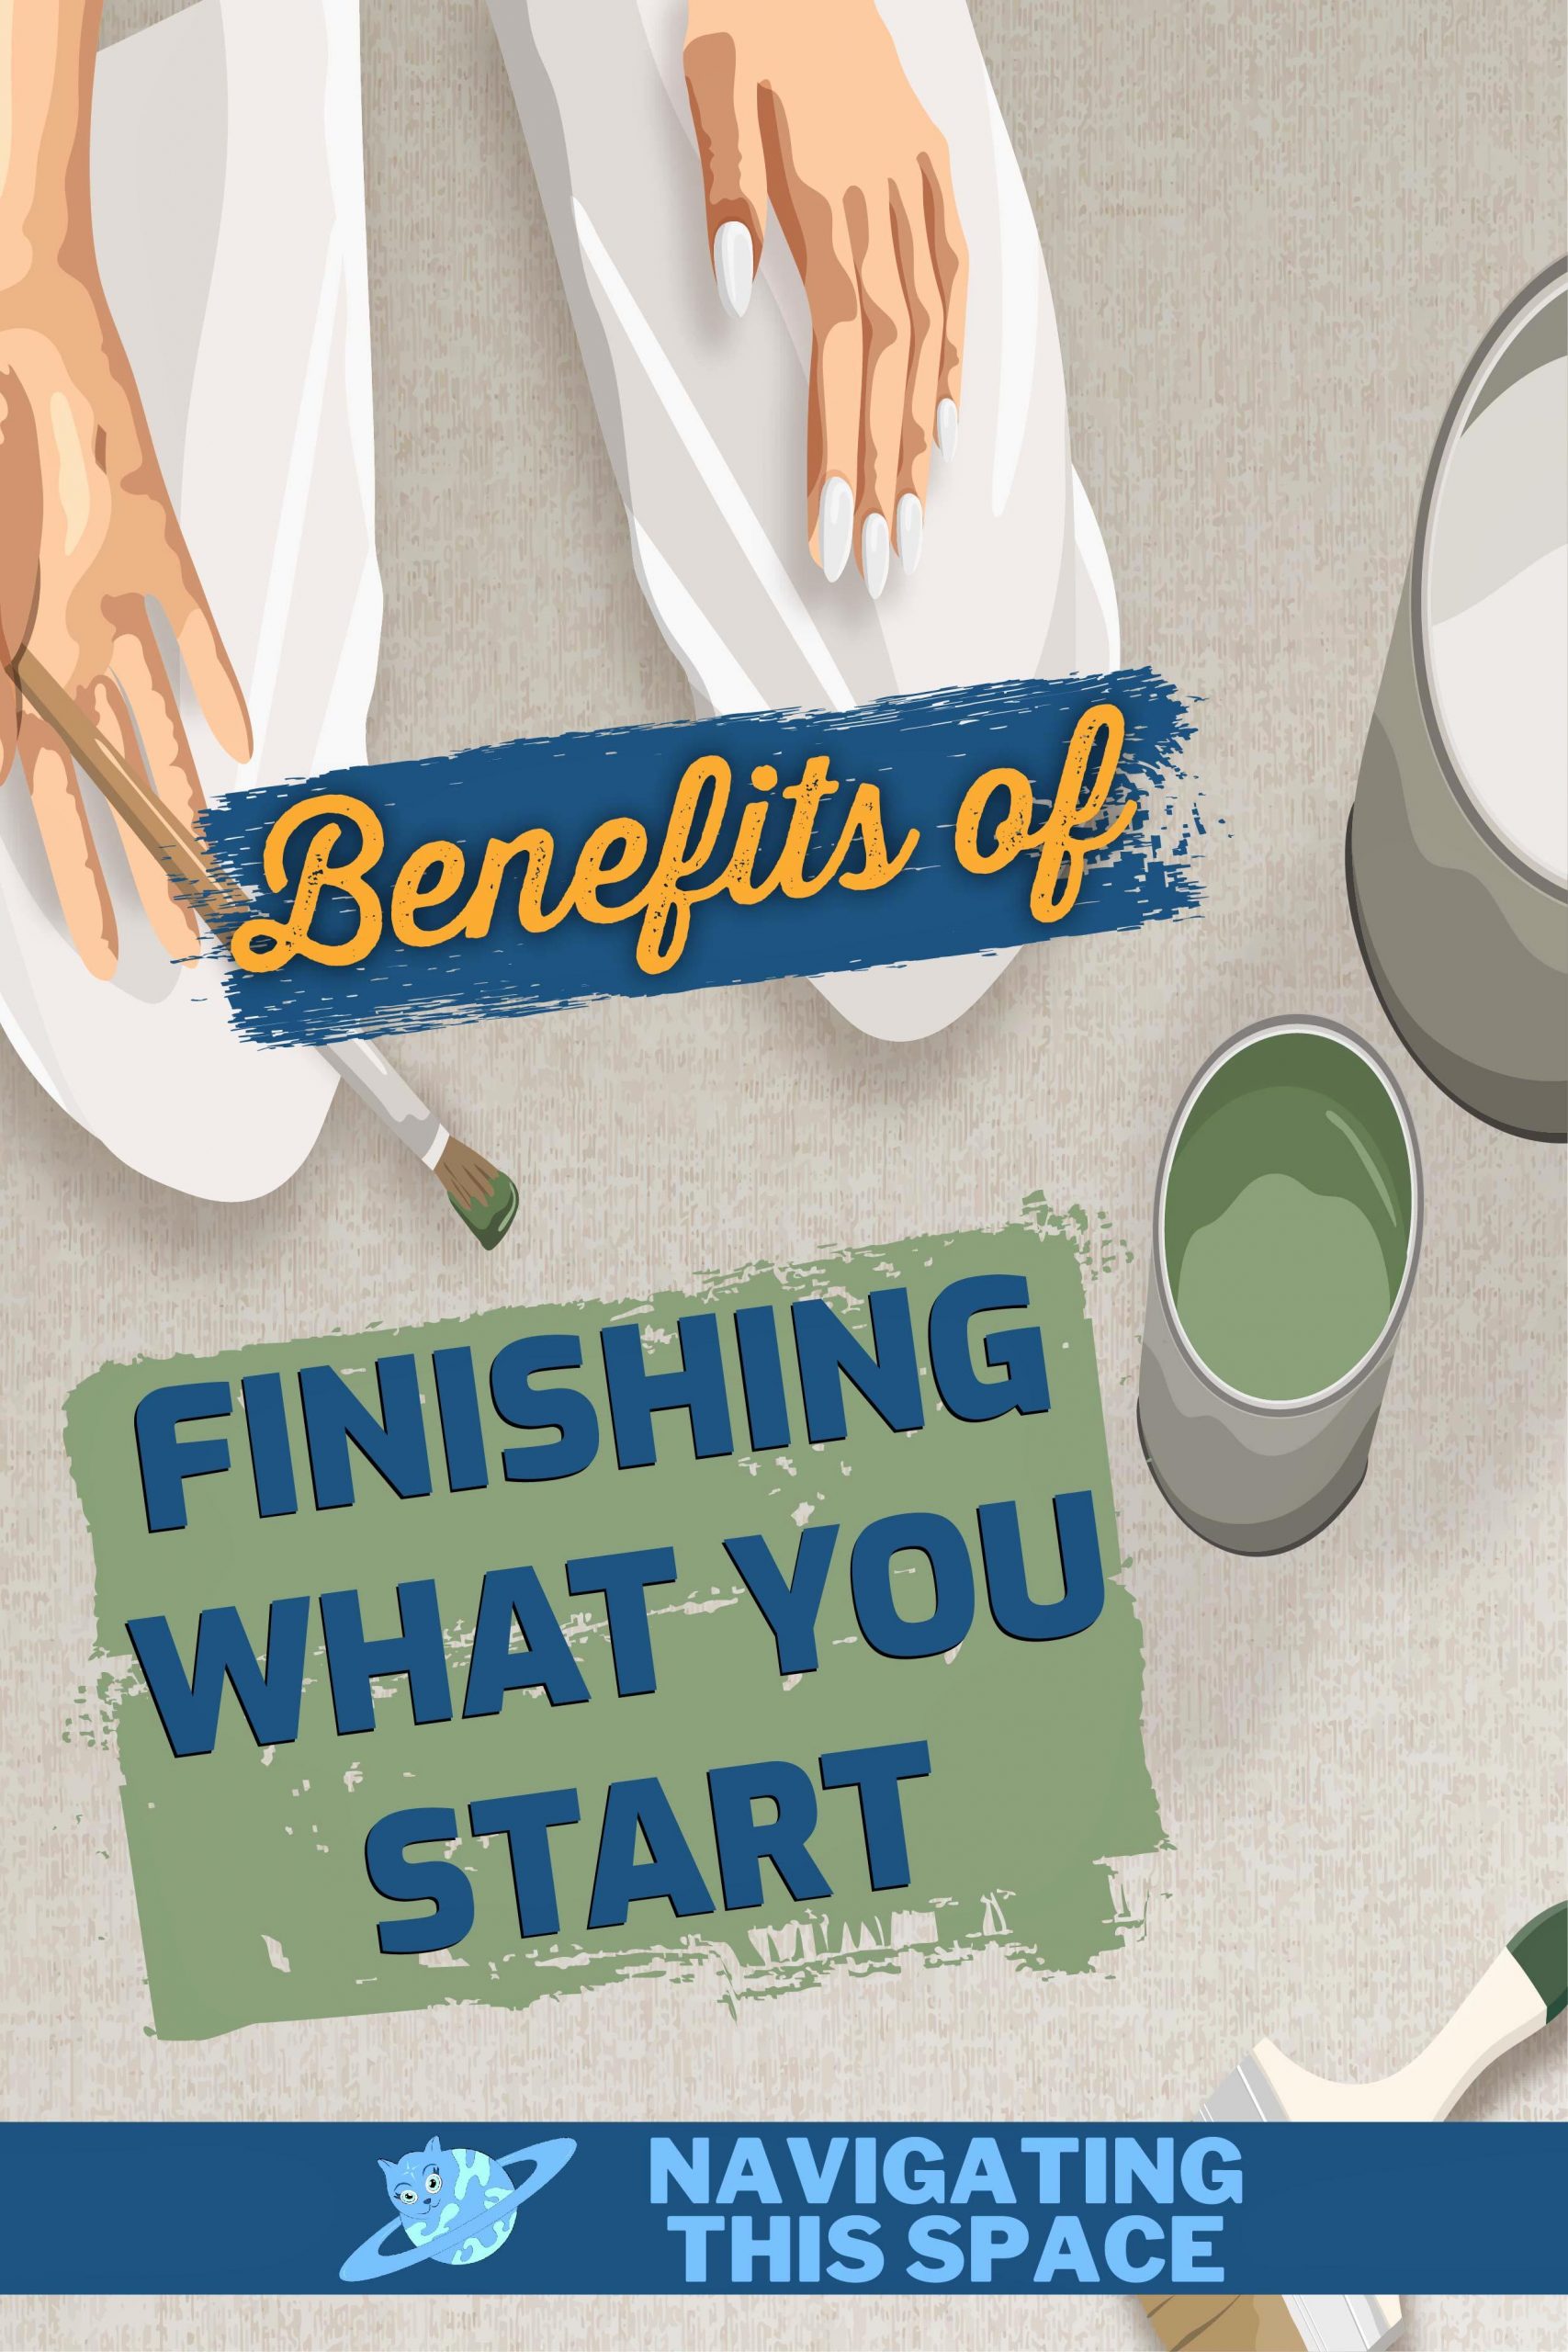 Benefits of finishing what you start